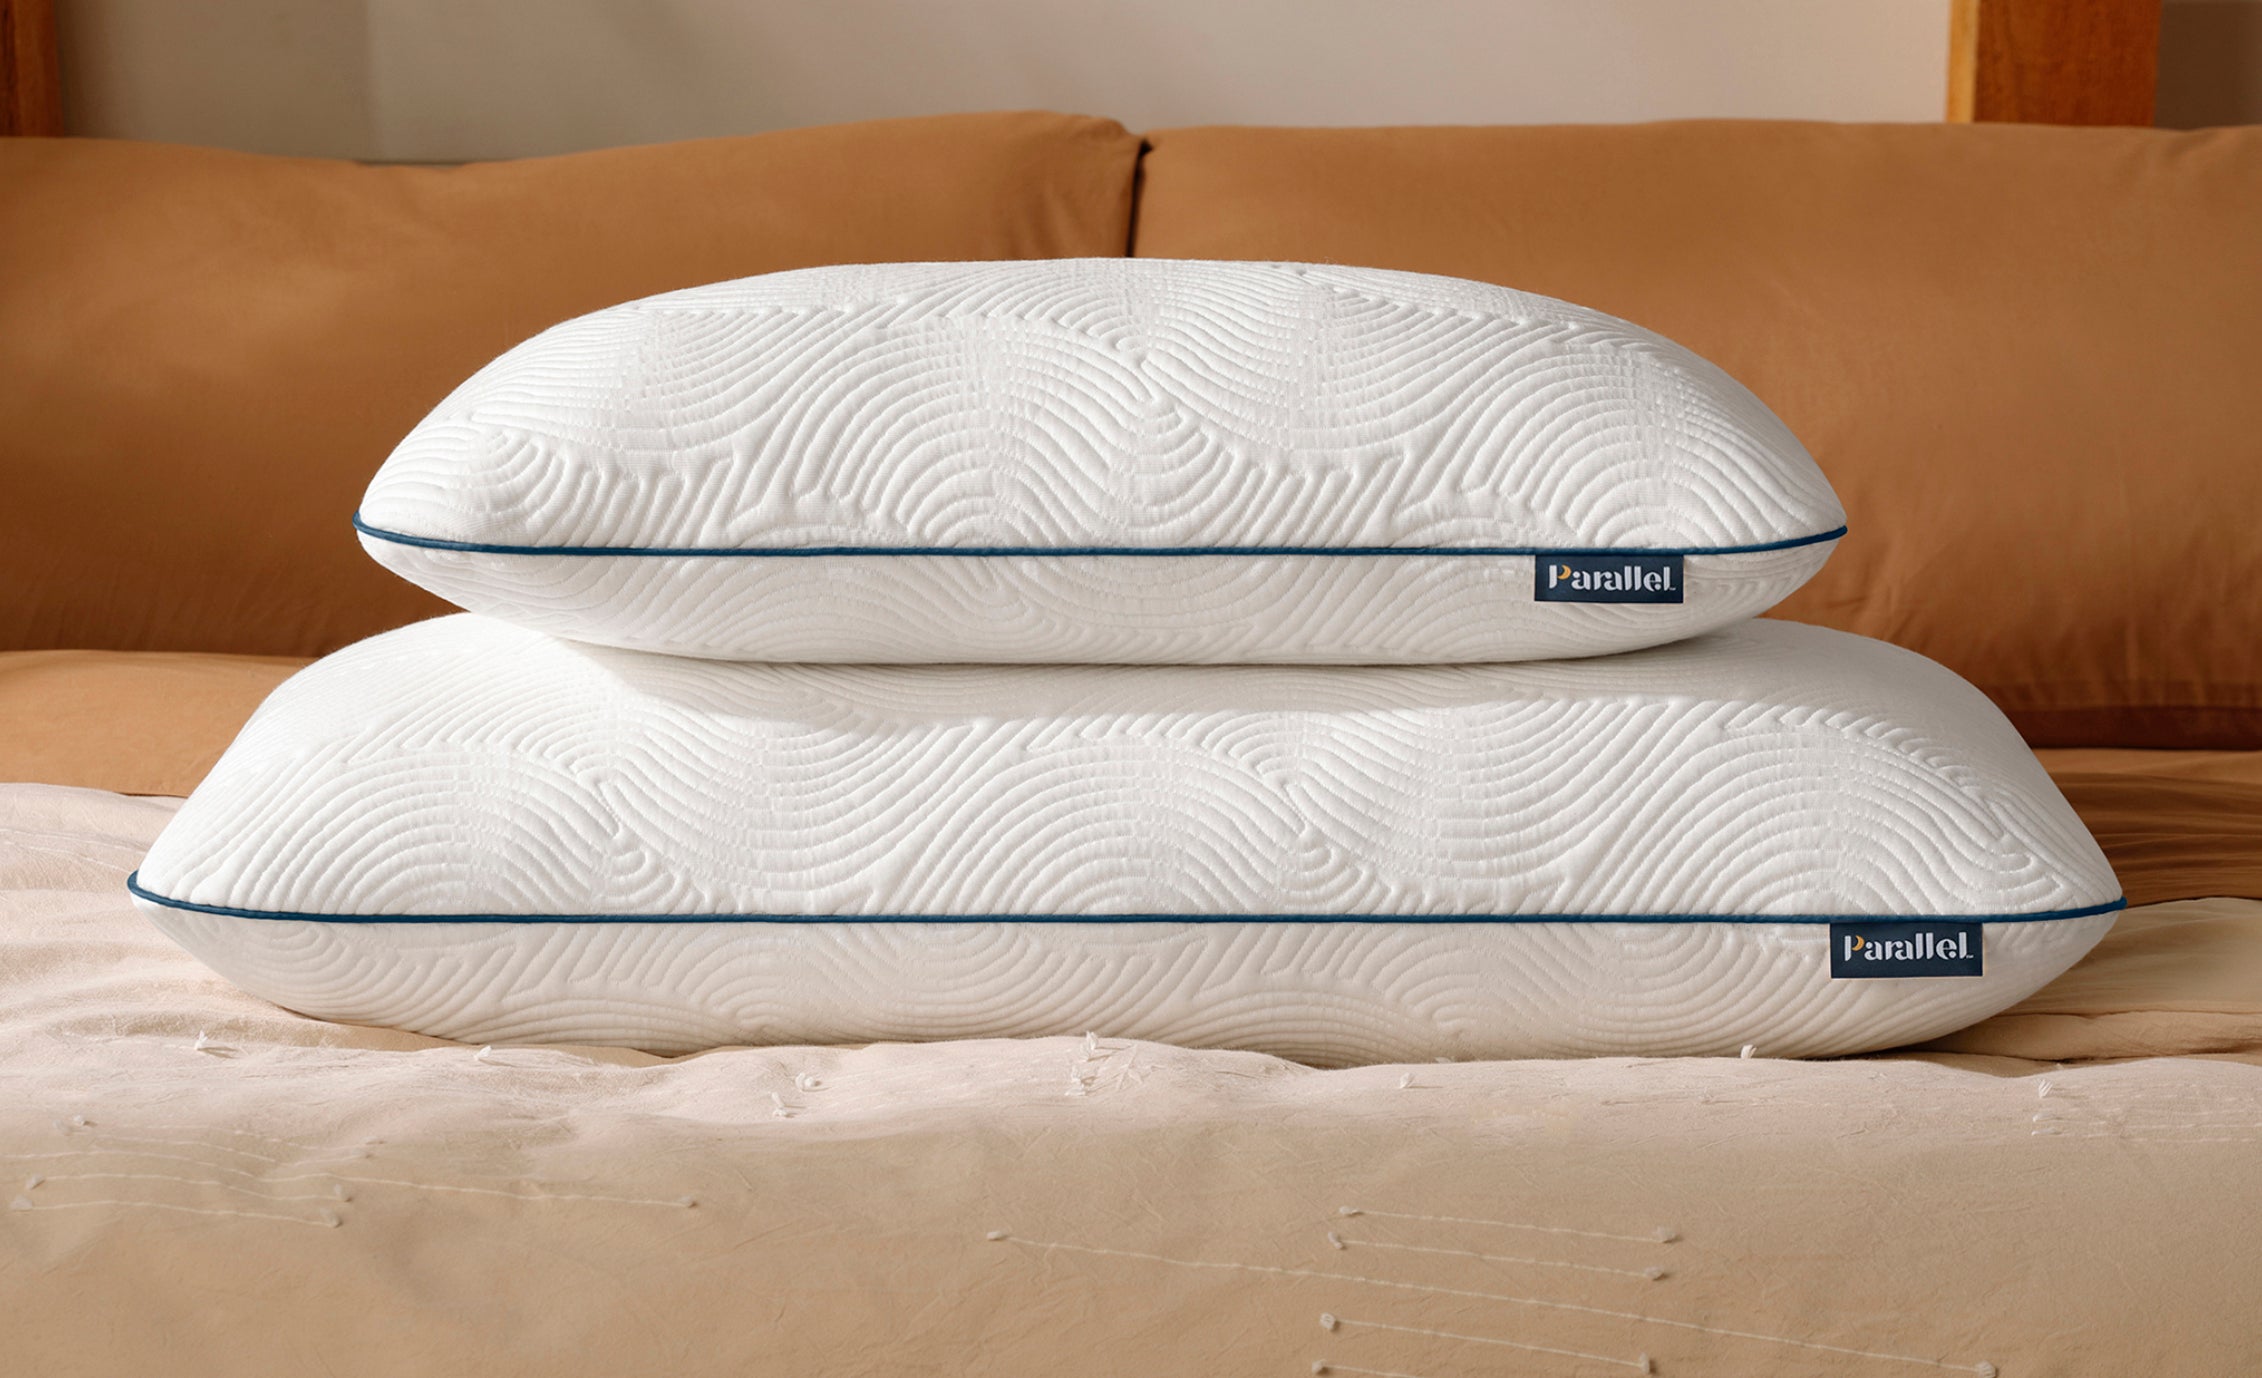 2 low profile high-end pillows stacked on stylish bed